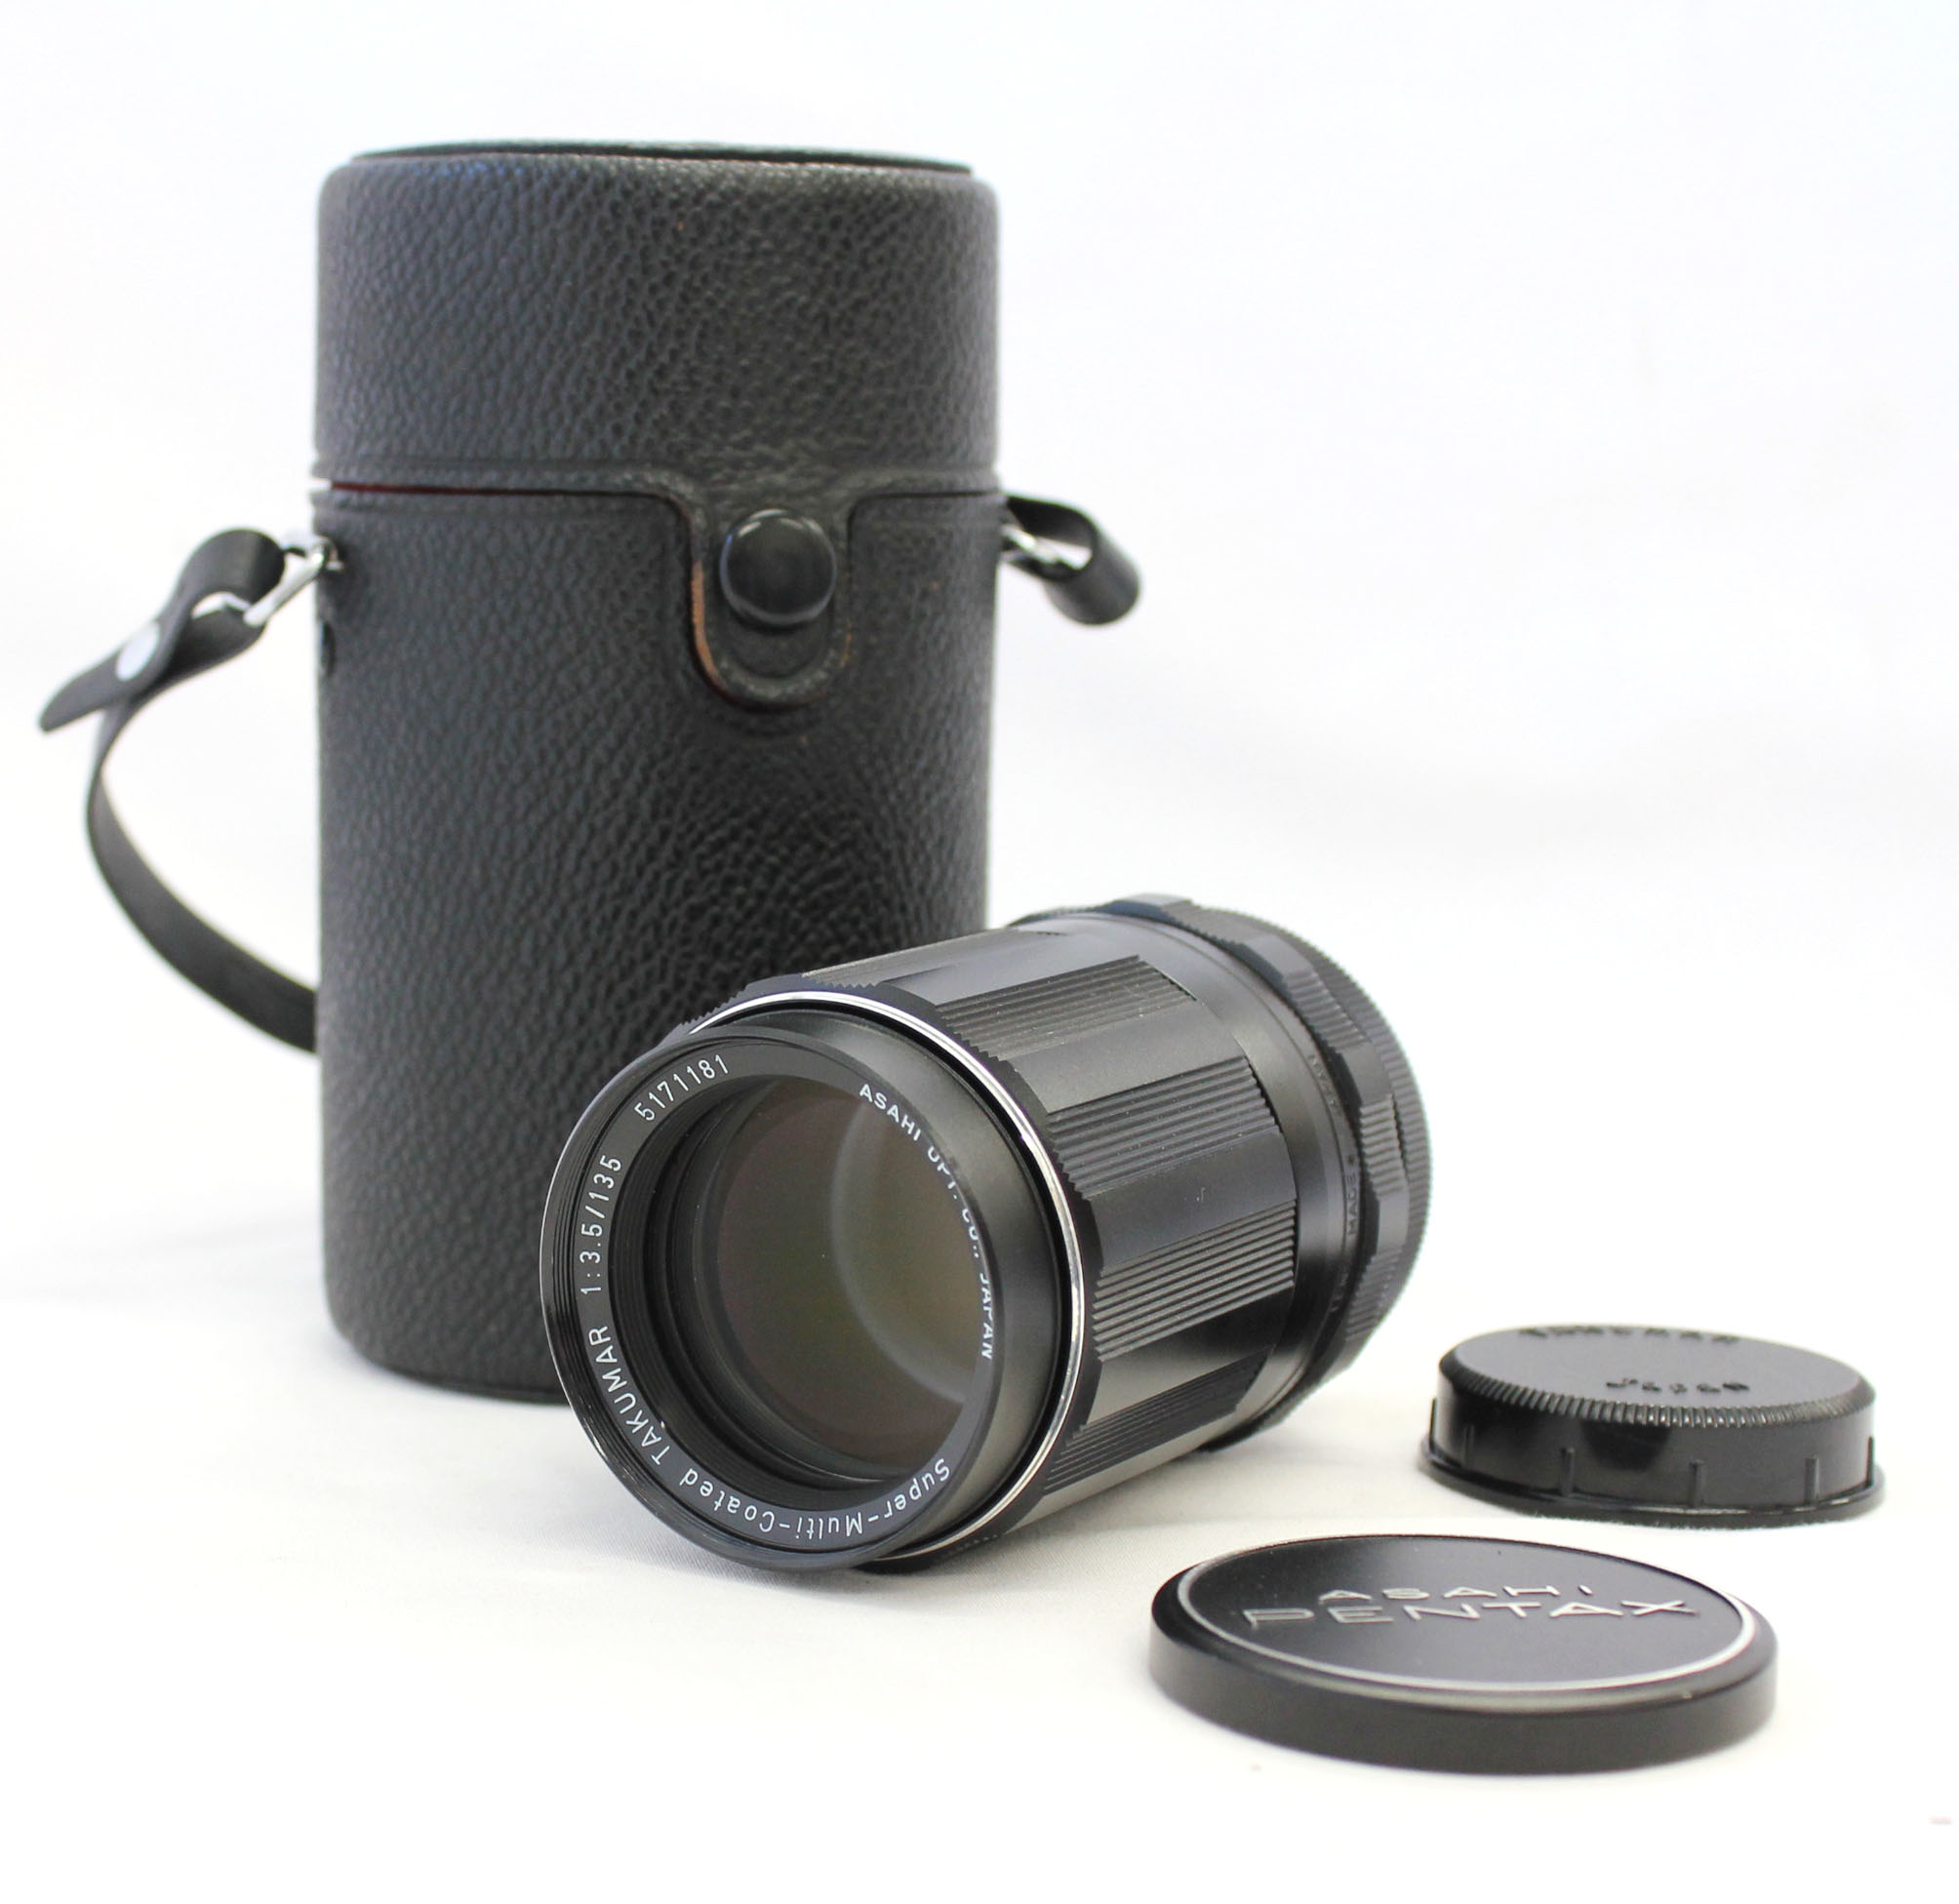  Asahi Pentax Super-Multi-Coated Takumar 135mm F/3.5 M42 Lens with Case from Japan Photo 0